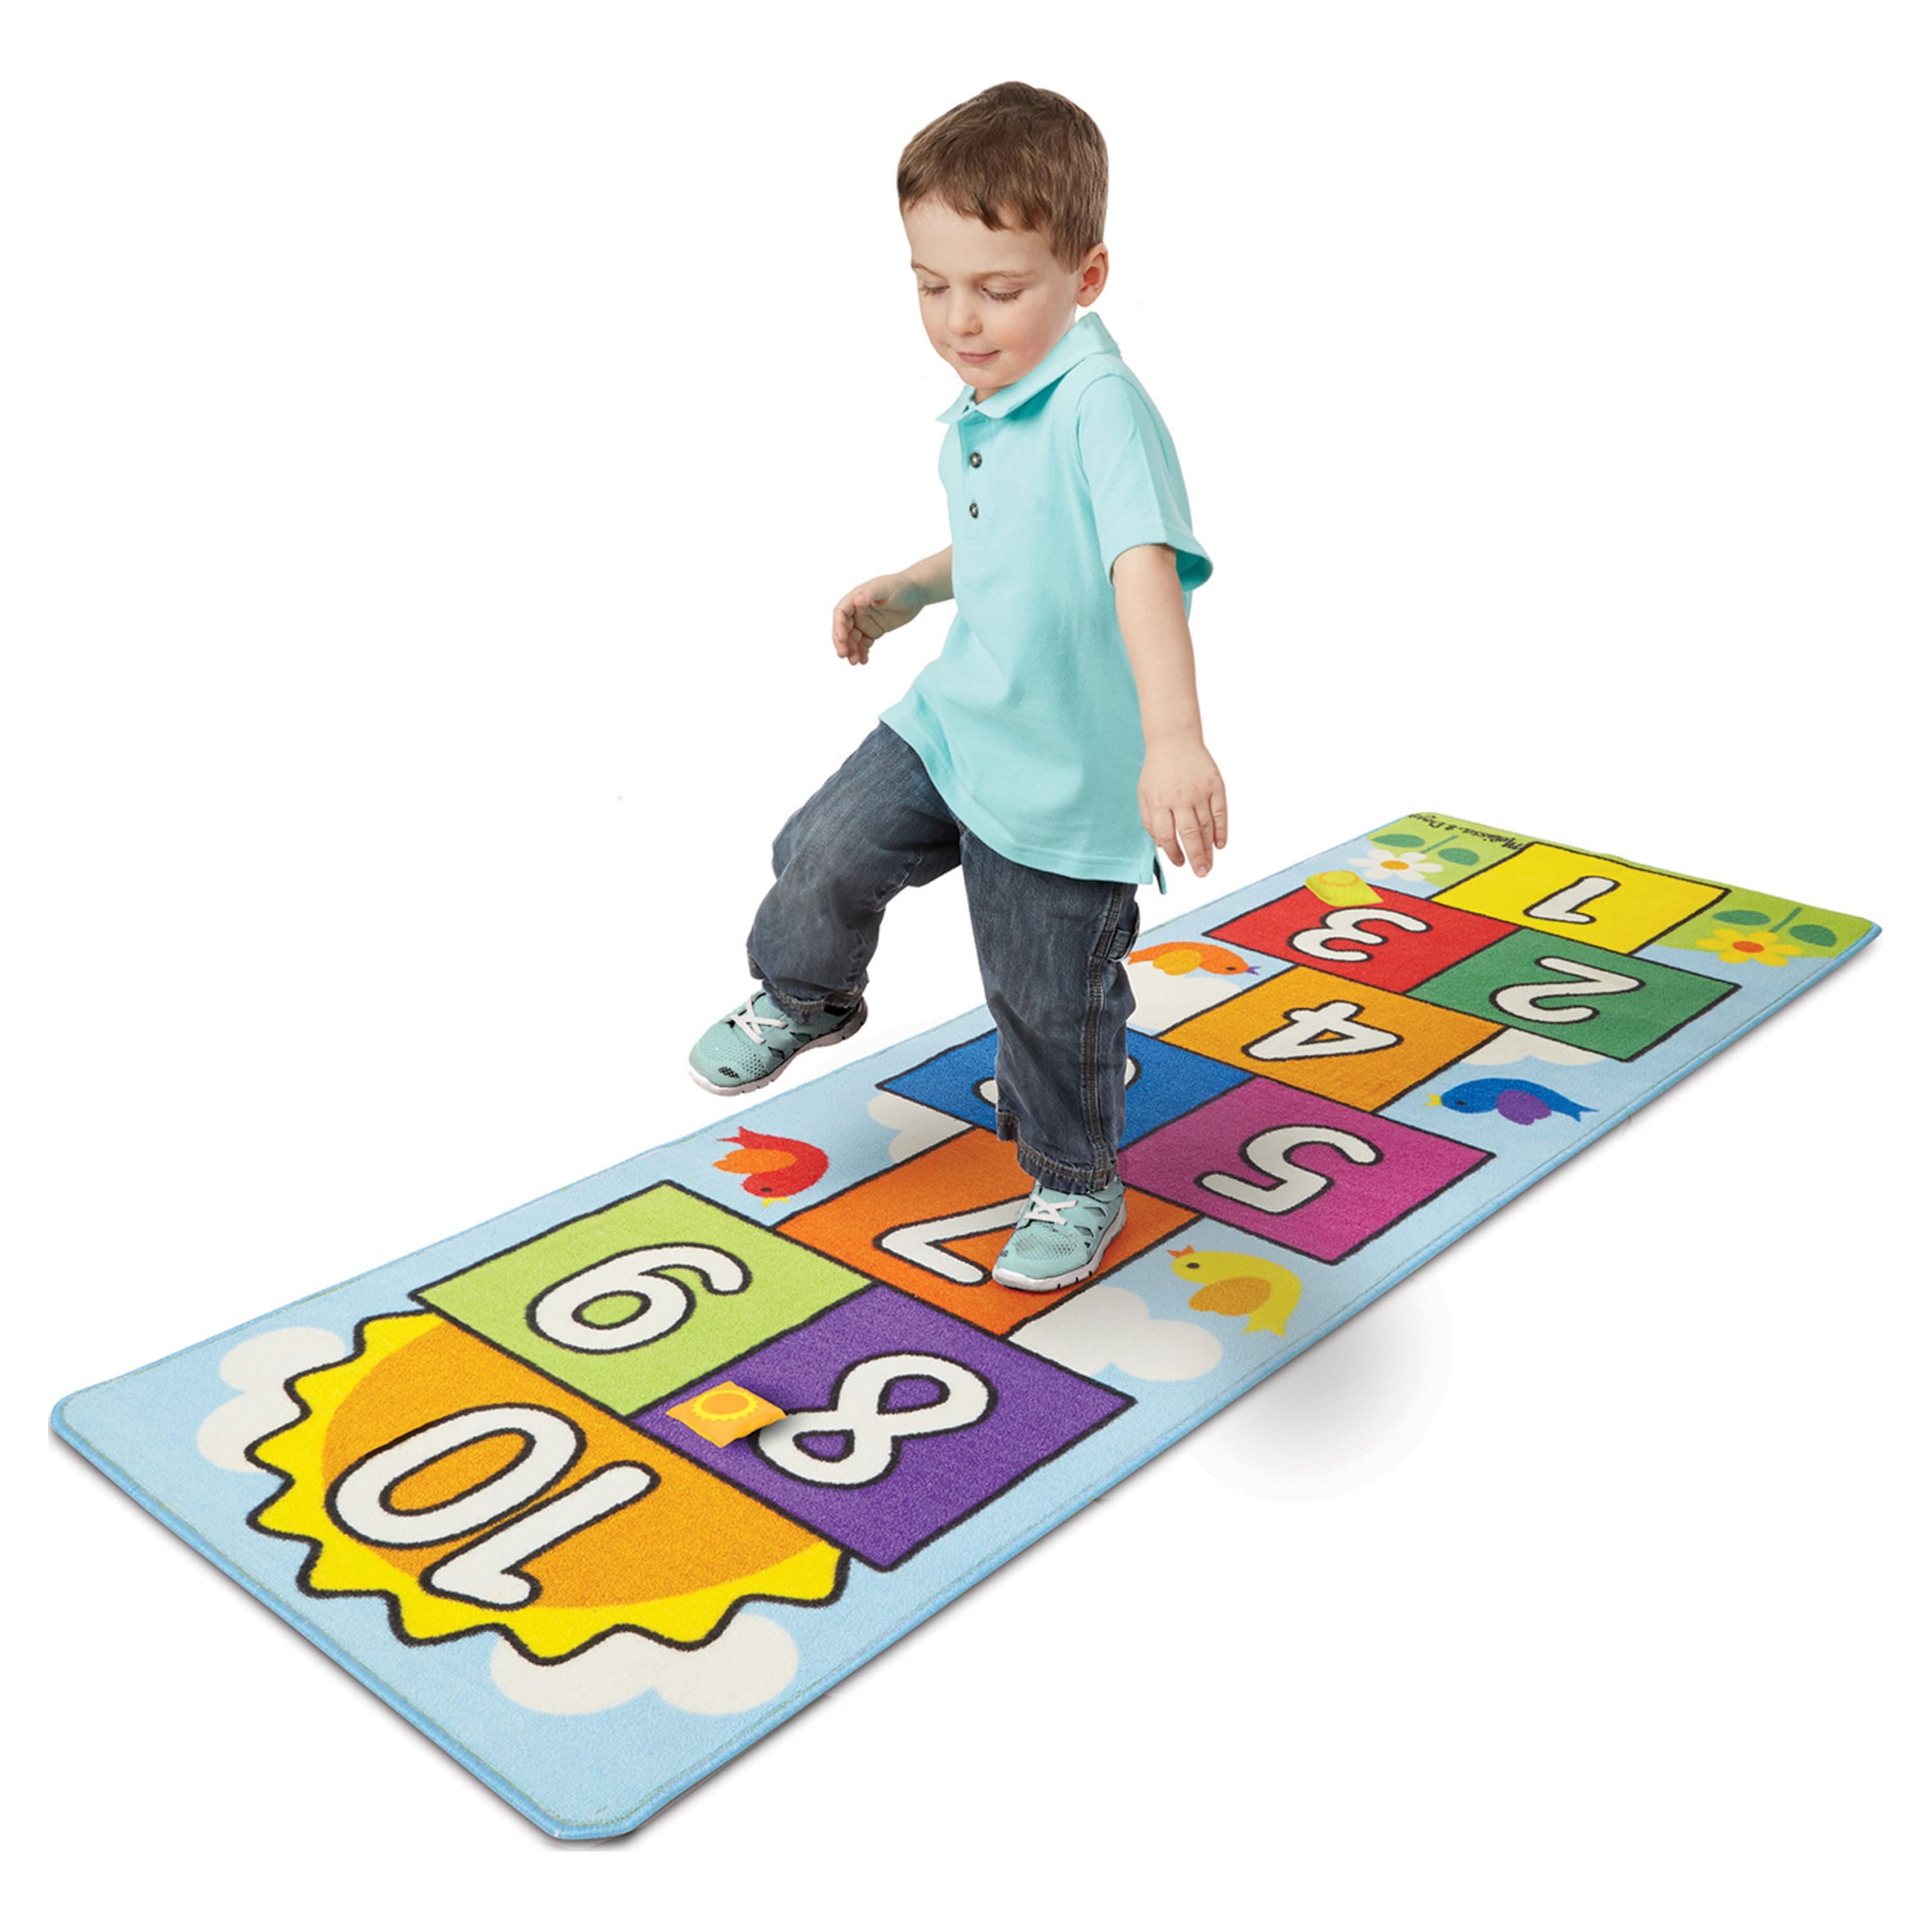 Multicolor Velvet Toy Park F 953 Hopscotch Playing Mat at Rs 2950